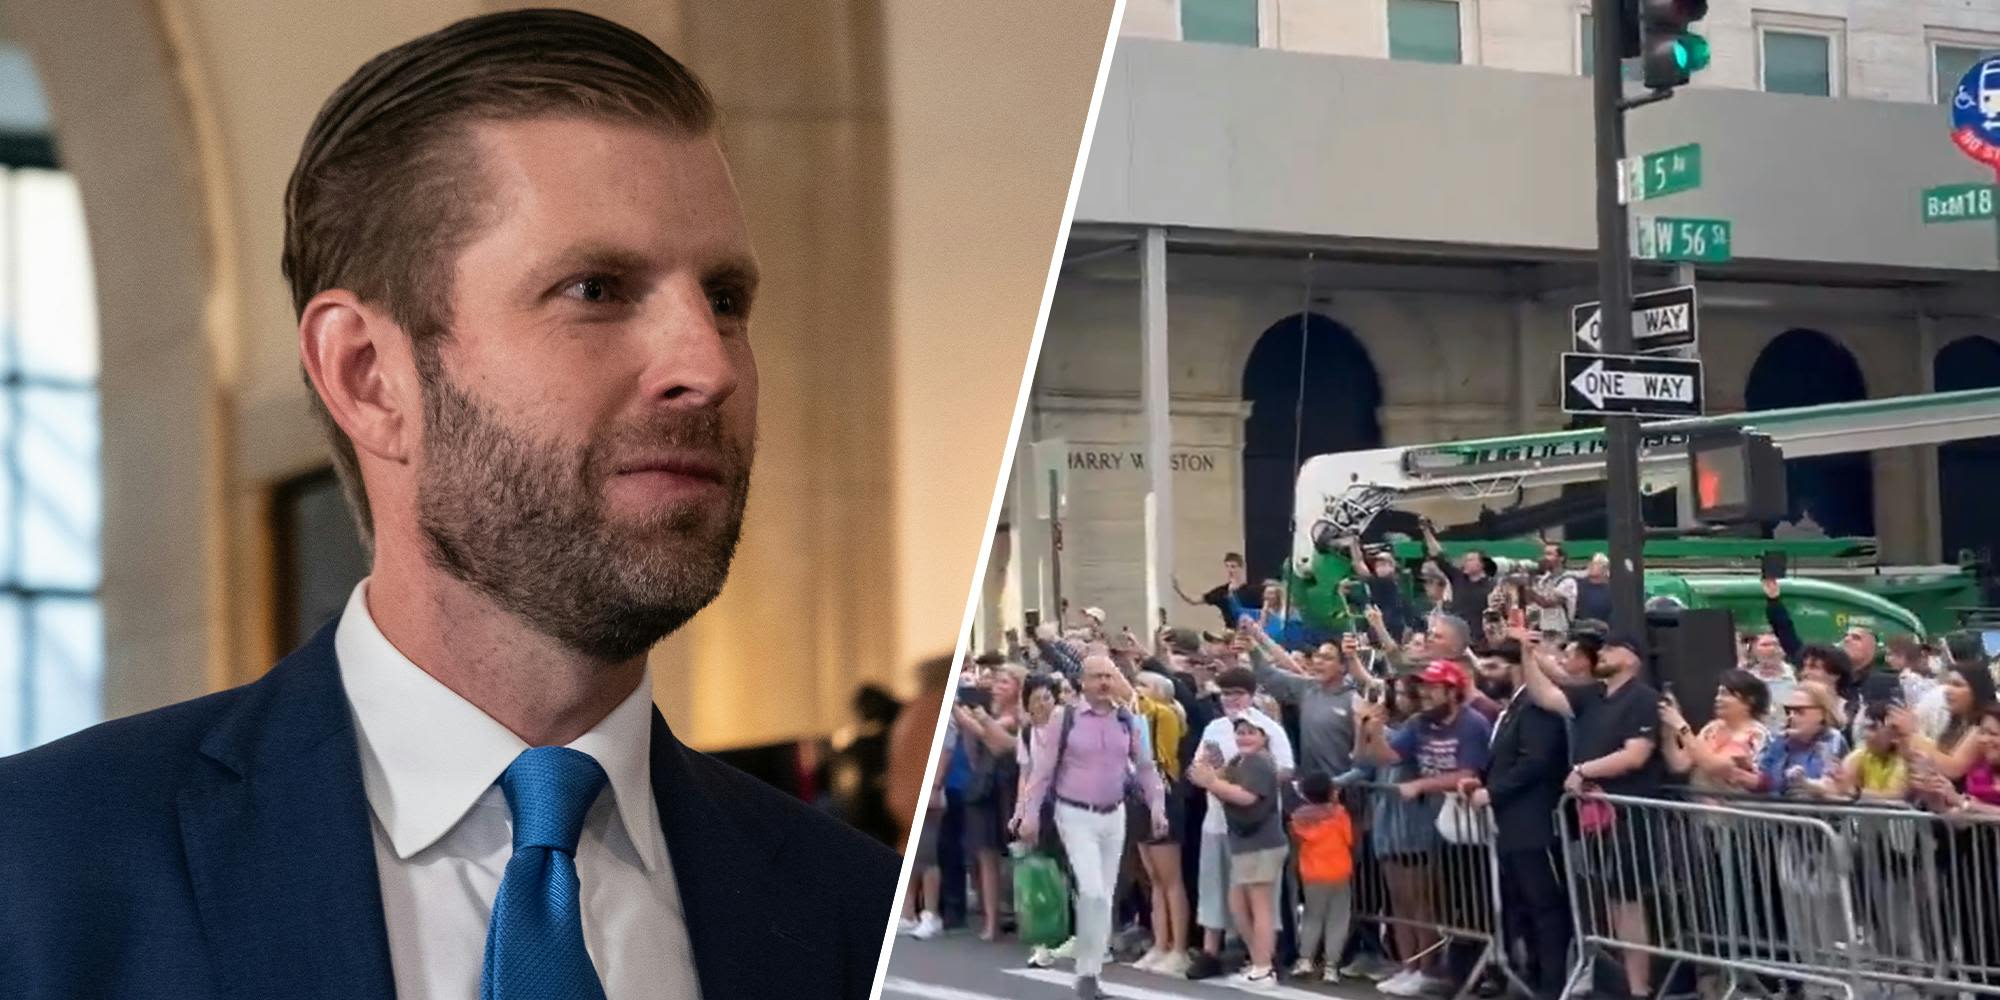 Trump fans, Biden supporters, or tourists: Eric Trump's crowd video sparks lengthy disagreement